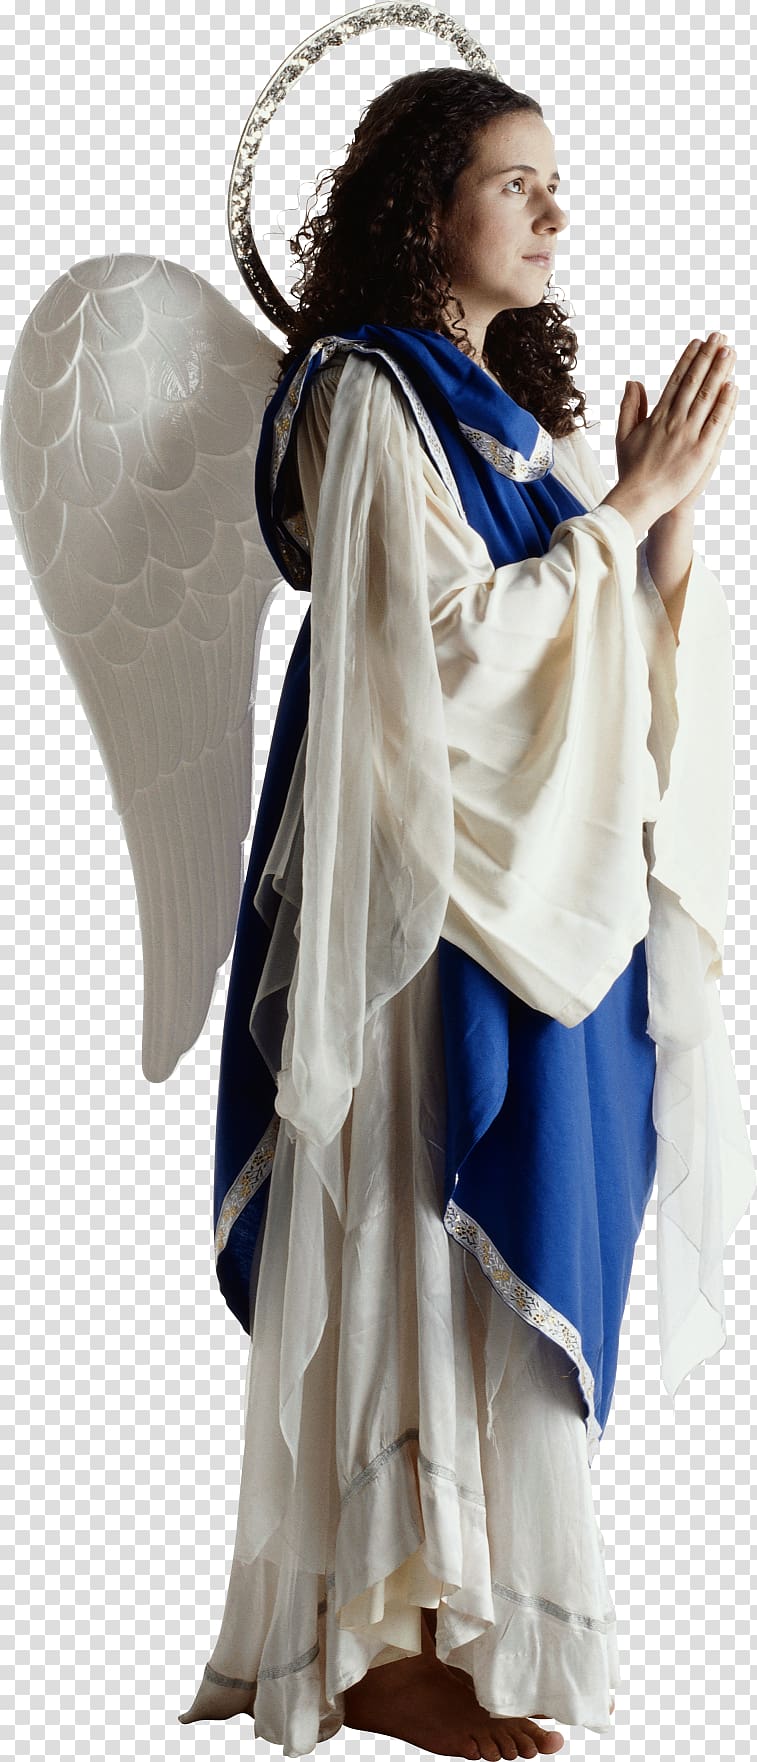 Angel Woman Computer Animation Child, angel transparent background PNG clipart